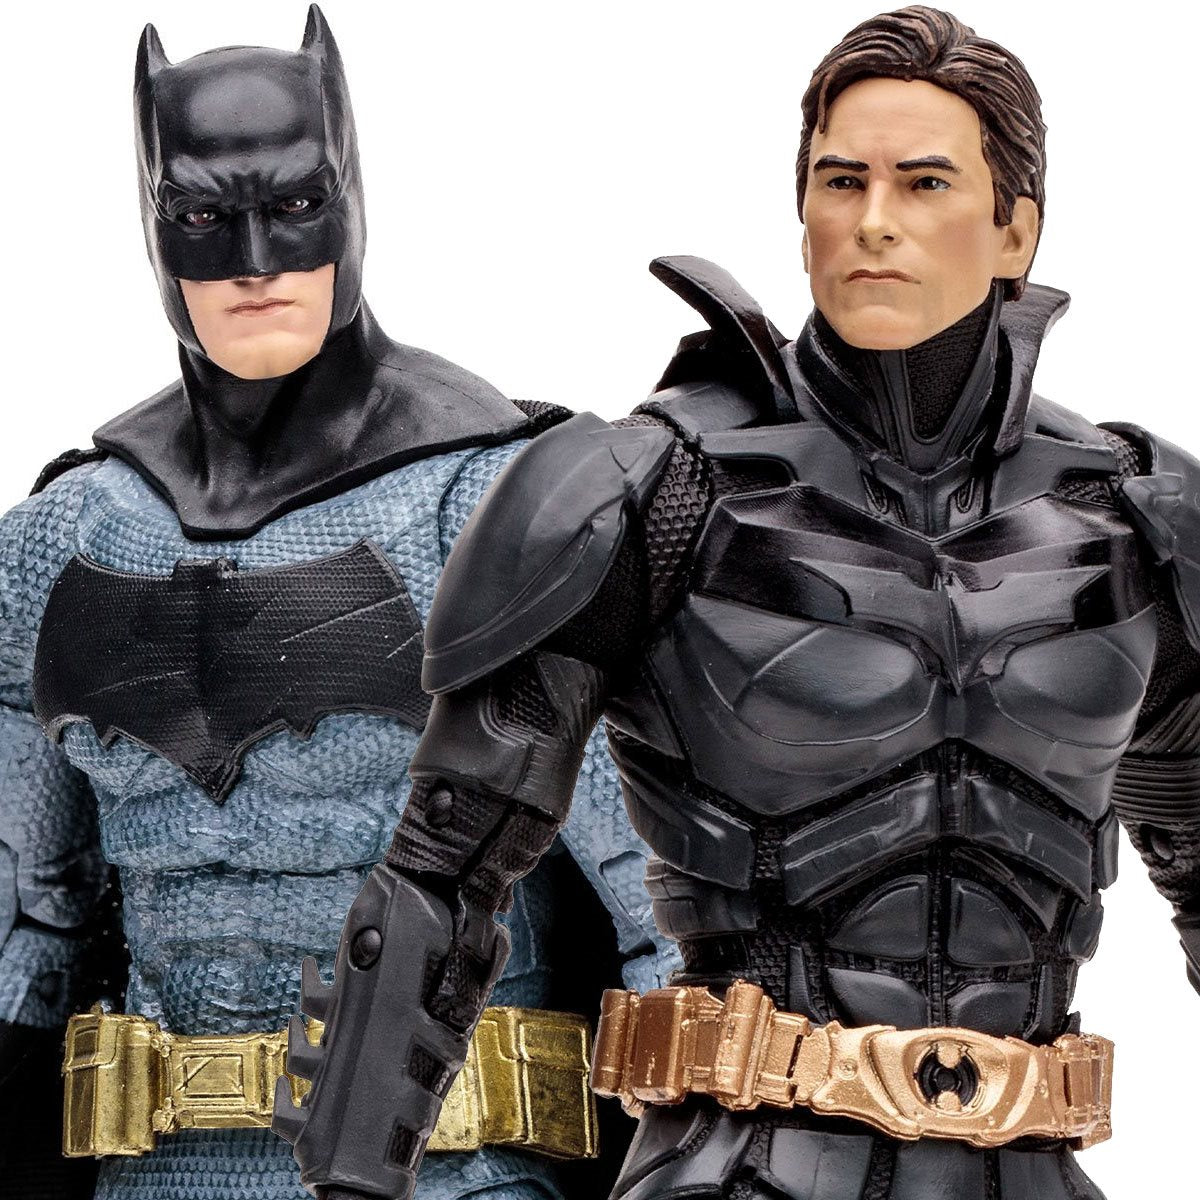 Secure Your Collectible: Pre-Order the DC Multiverse The Dark Knight Skydive Batman Figure Today!